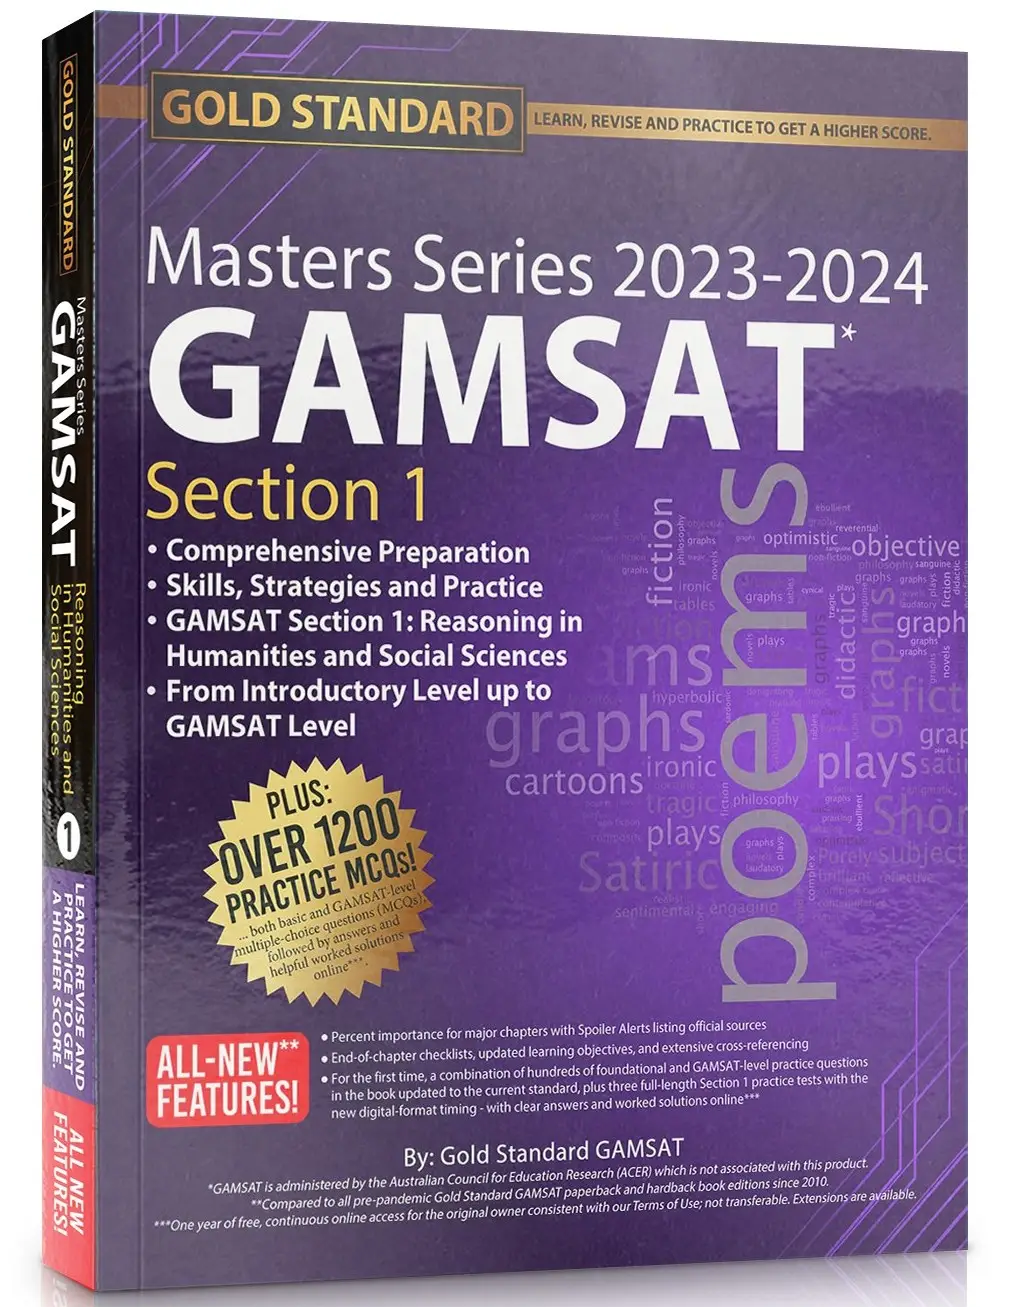 2023-2024 GAMSAT Masters Series Section 1